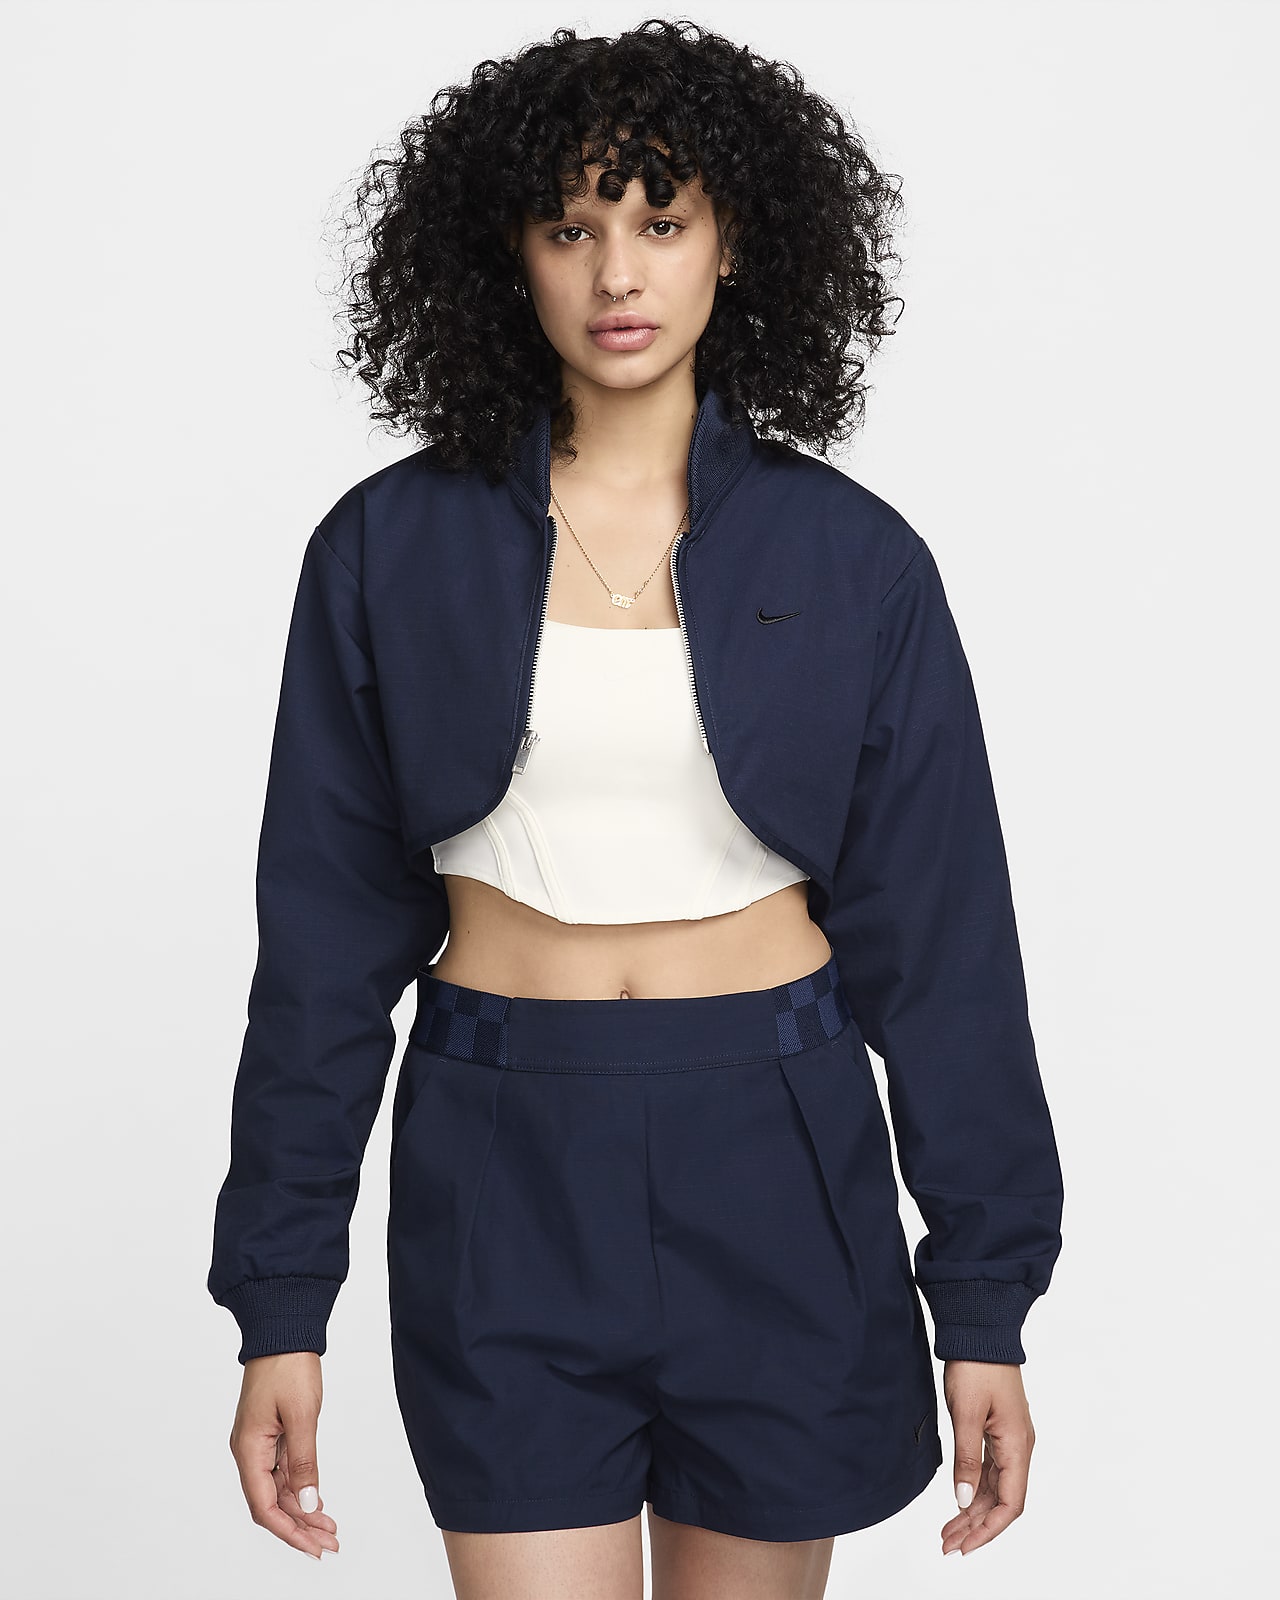 Chamarra cropped de cierre completo para mujer Nike Sportswear Collection